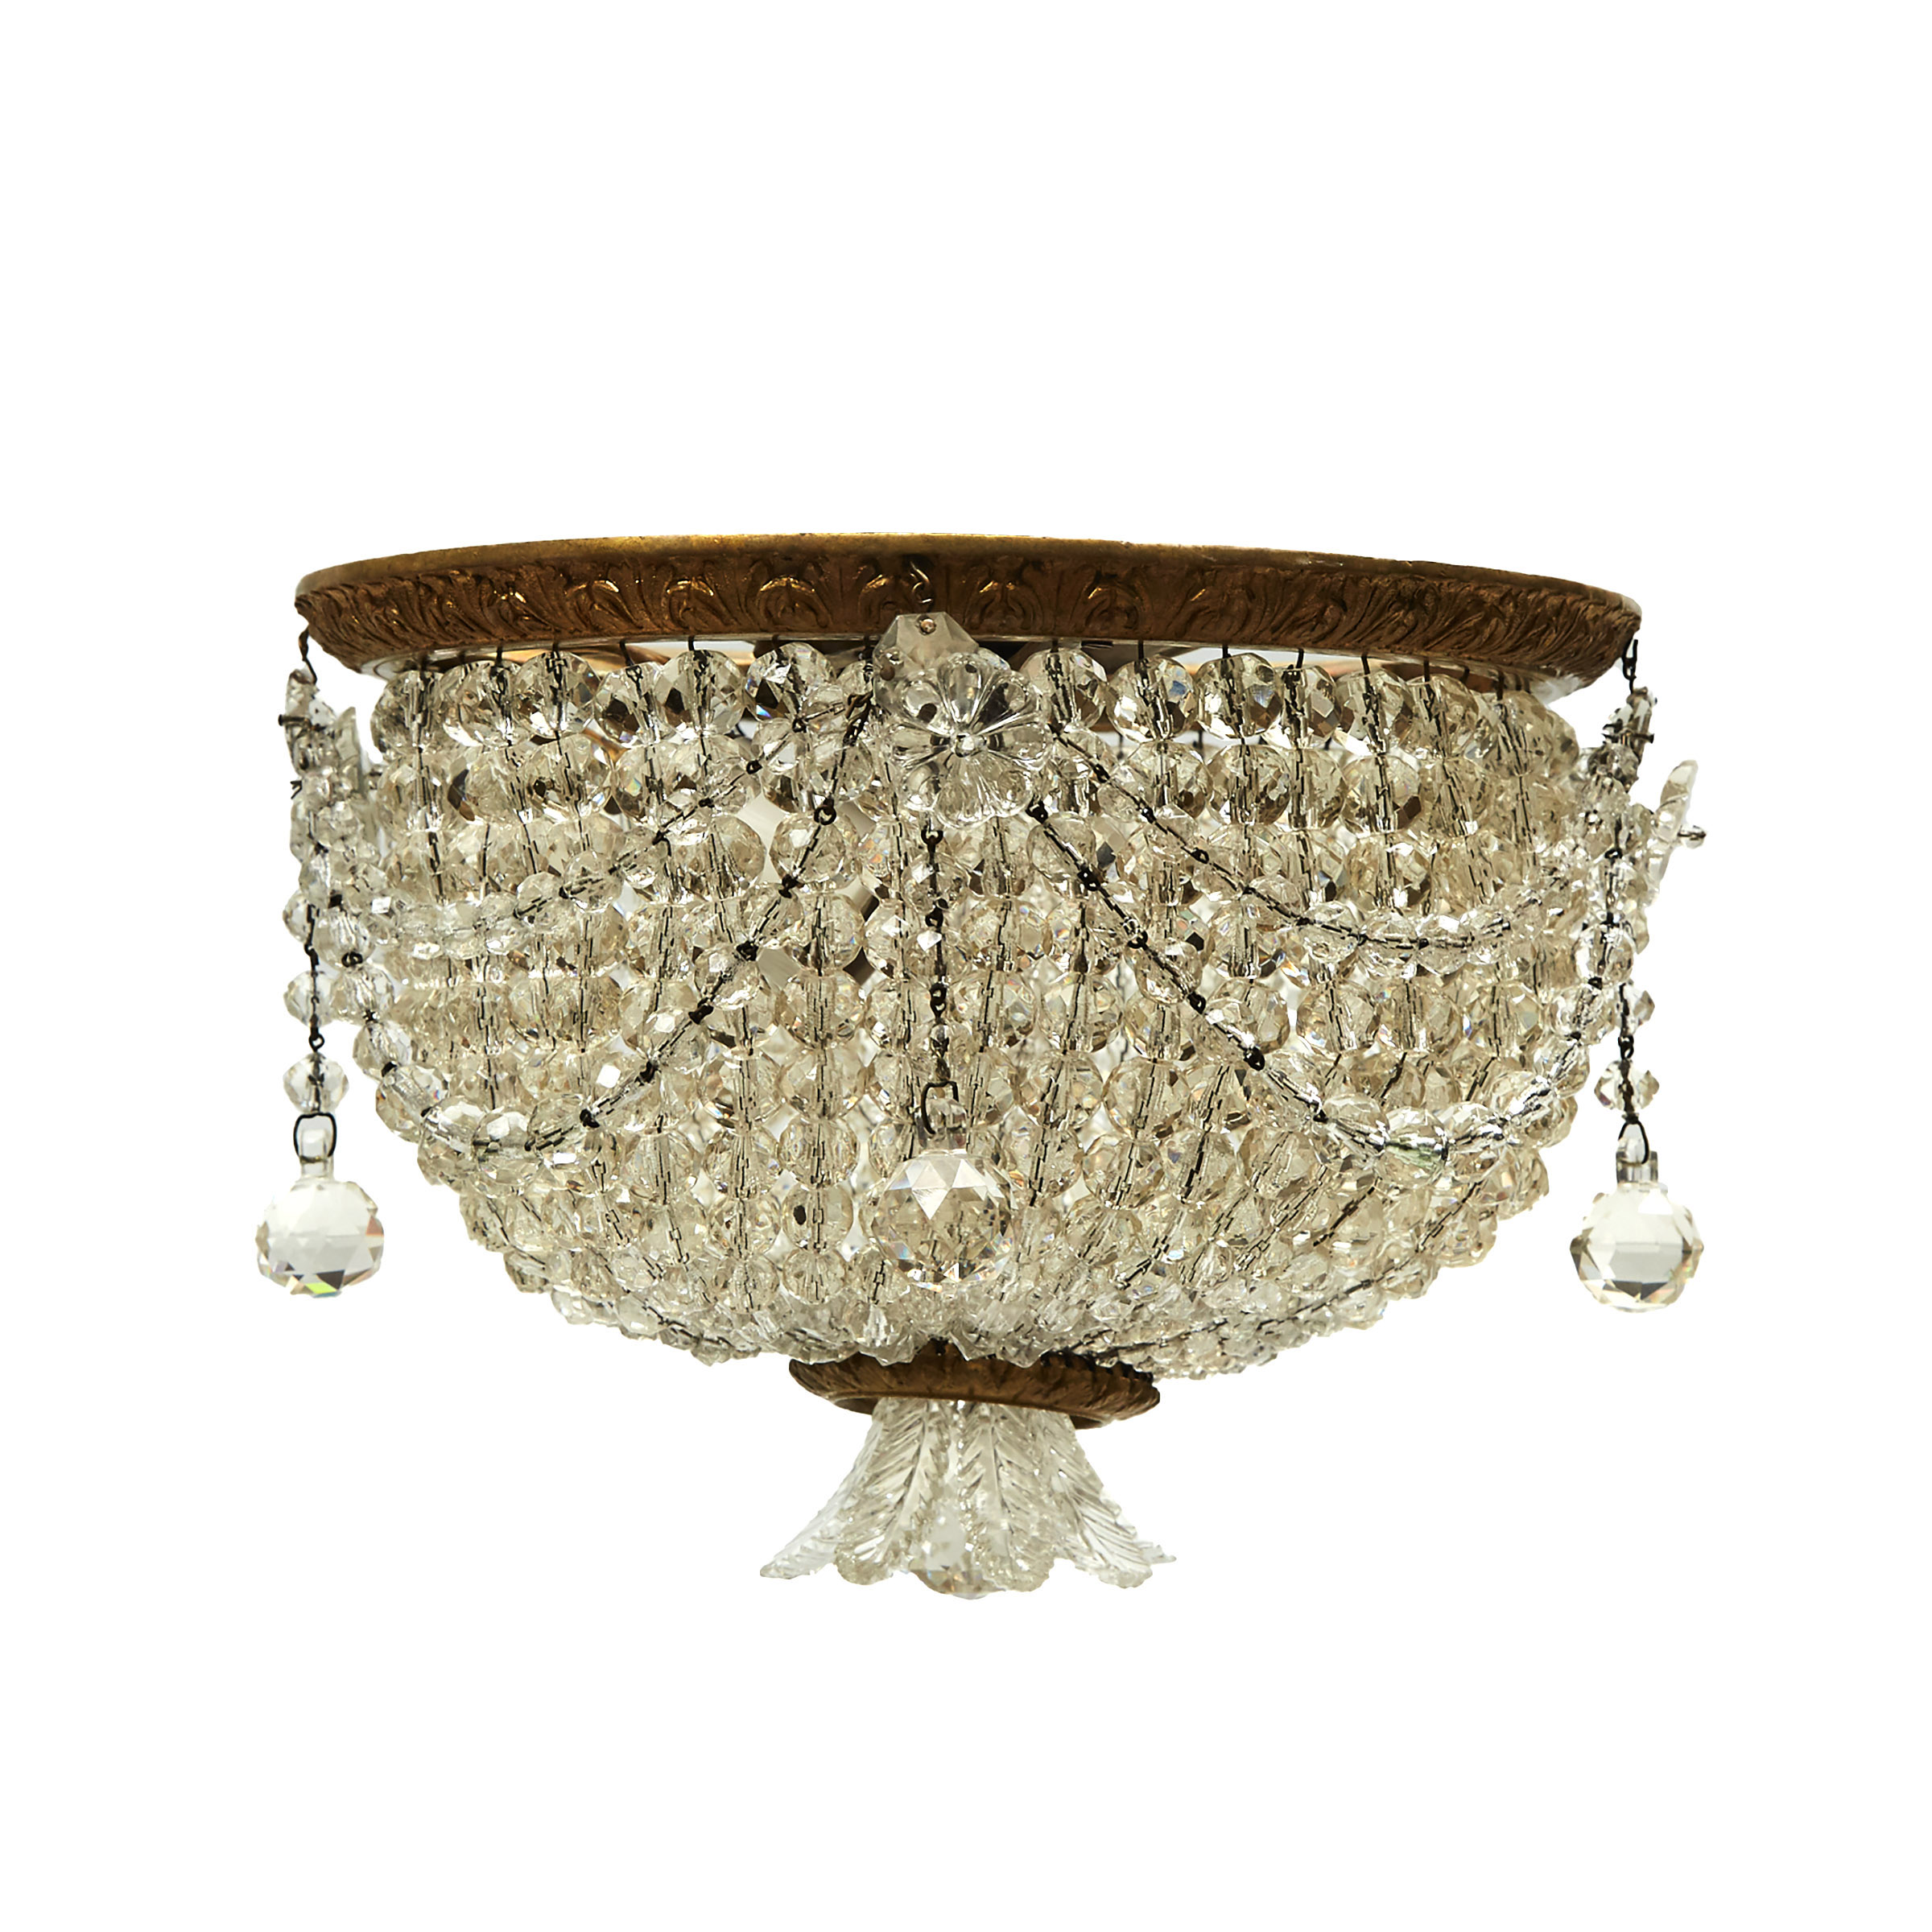 French Cut Glass Beaded Basket Form Ceiling Light Fixture, early 20th century